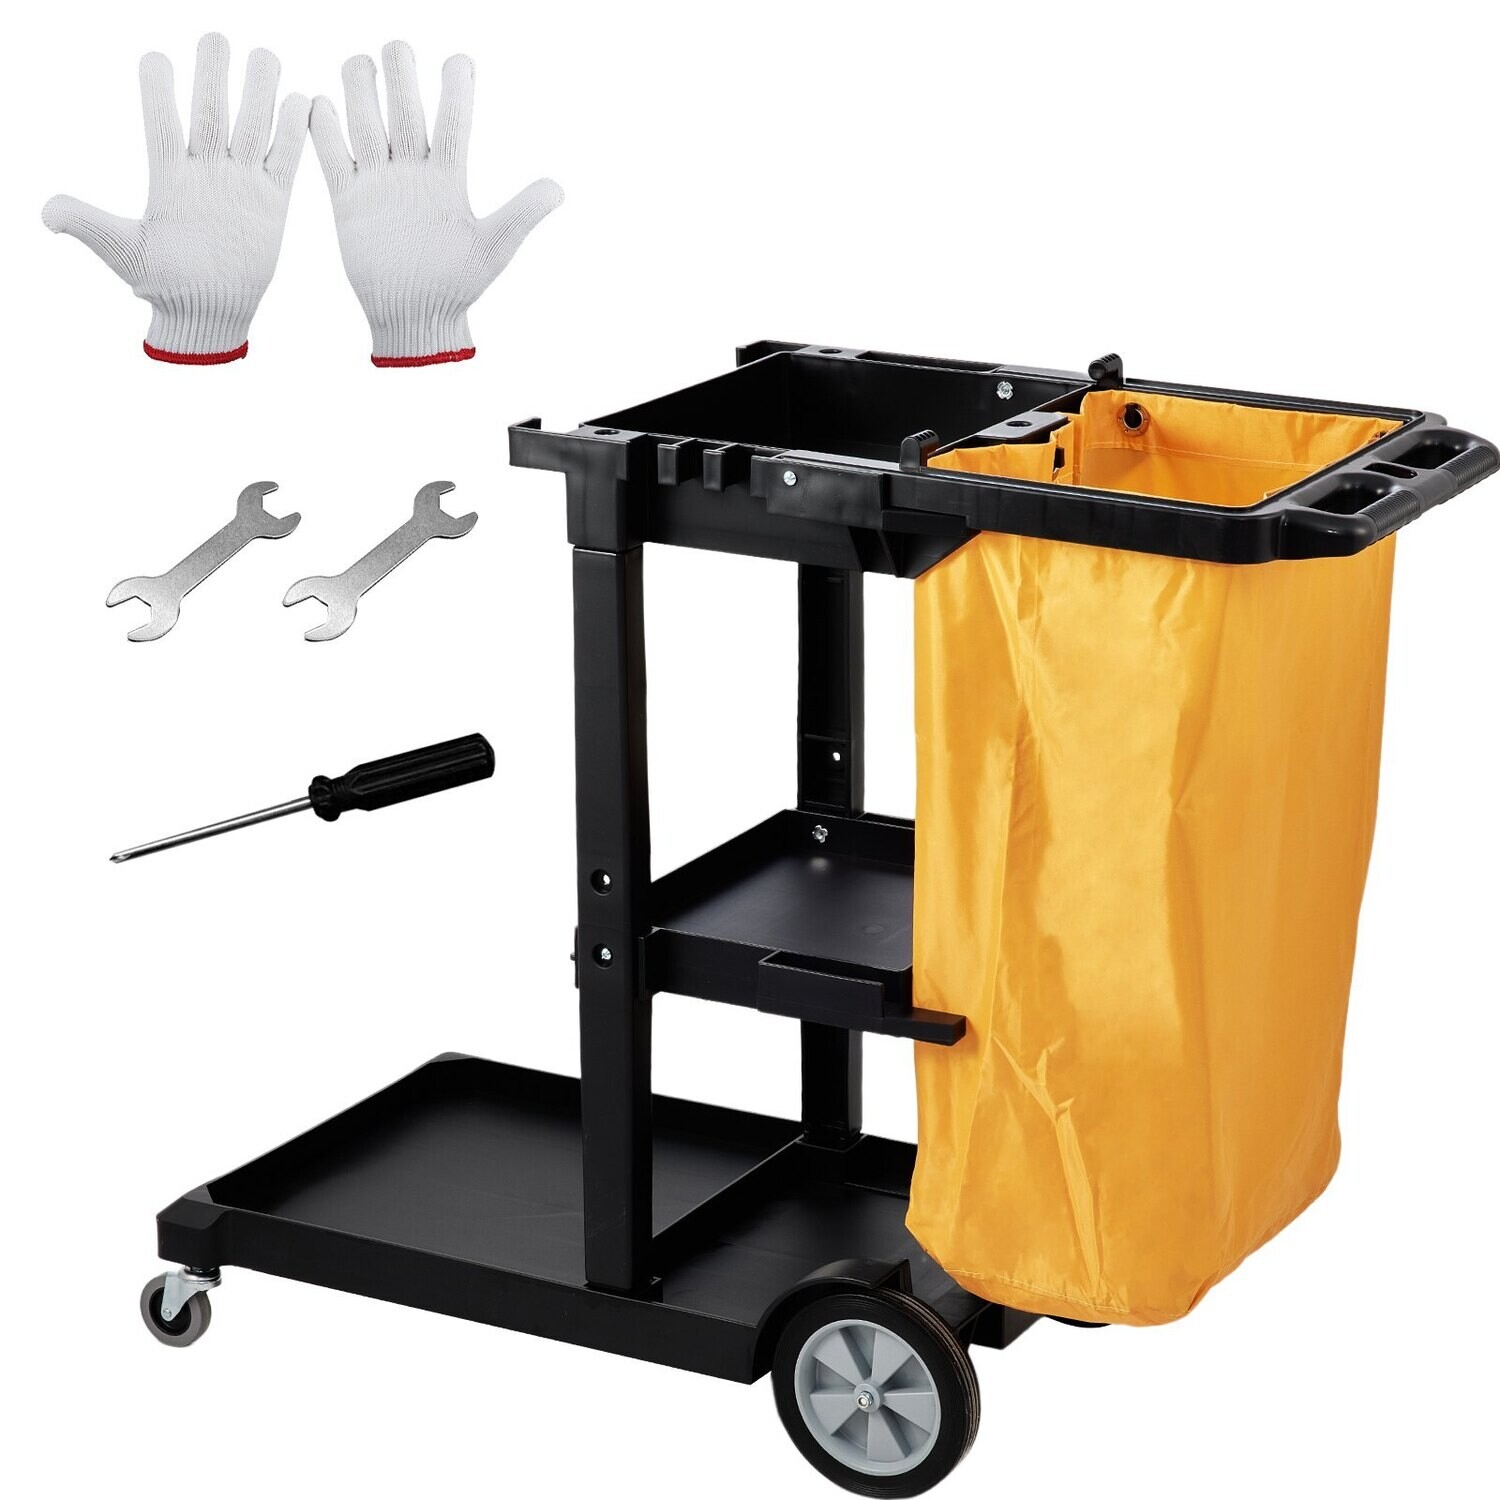 3-Shelf Commercial Janitorial Cart, 200 lbs Capacity Plastic Housekeeping Cart, with 25 Gallon PVC Bag and Cover, 47" x 20" x 38.6"